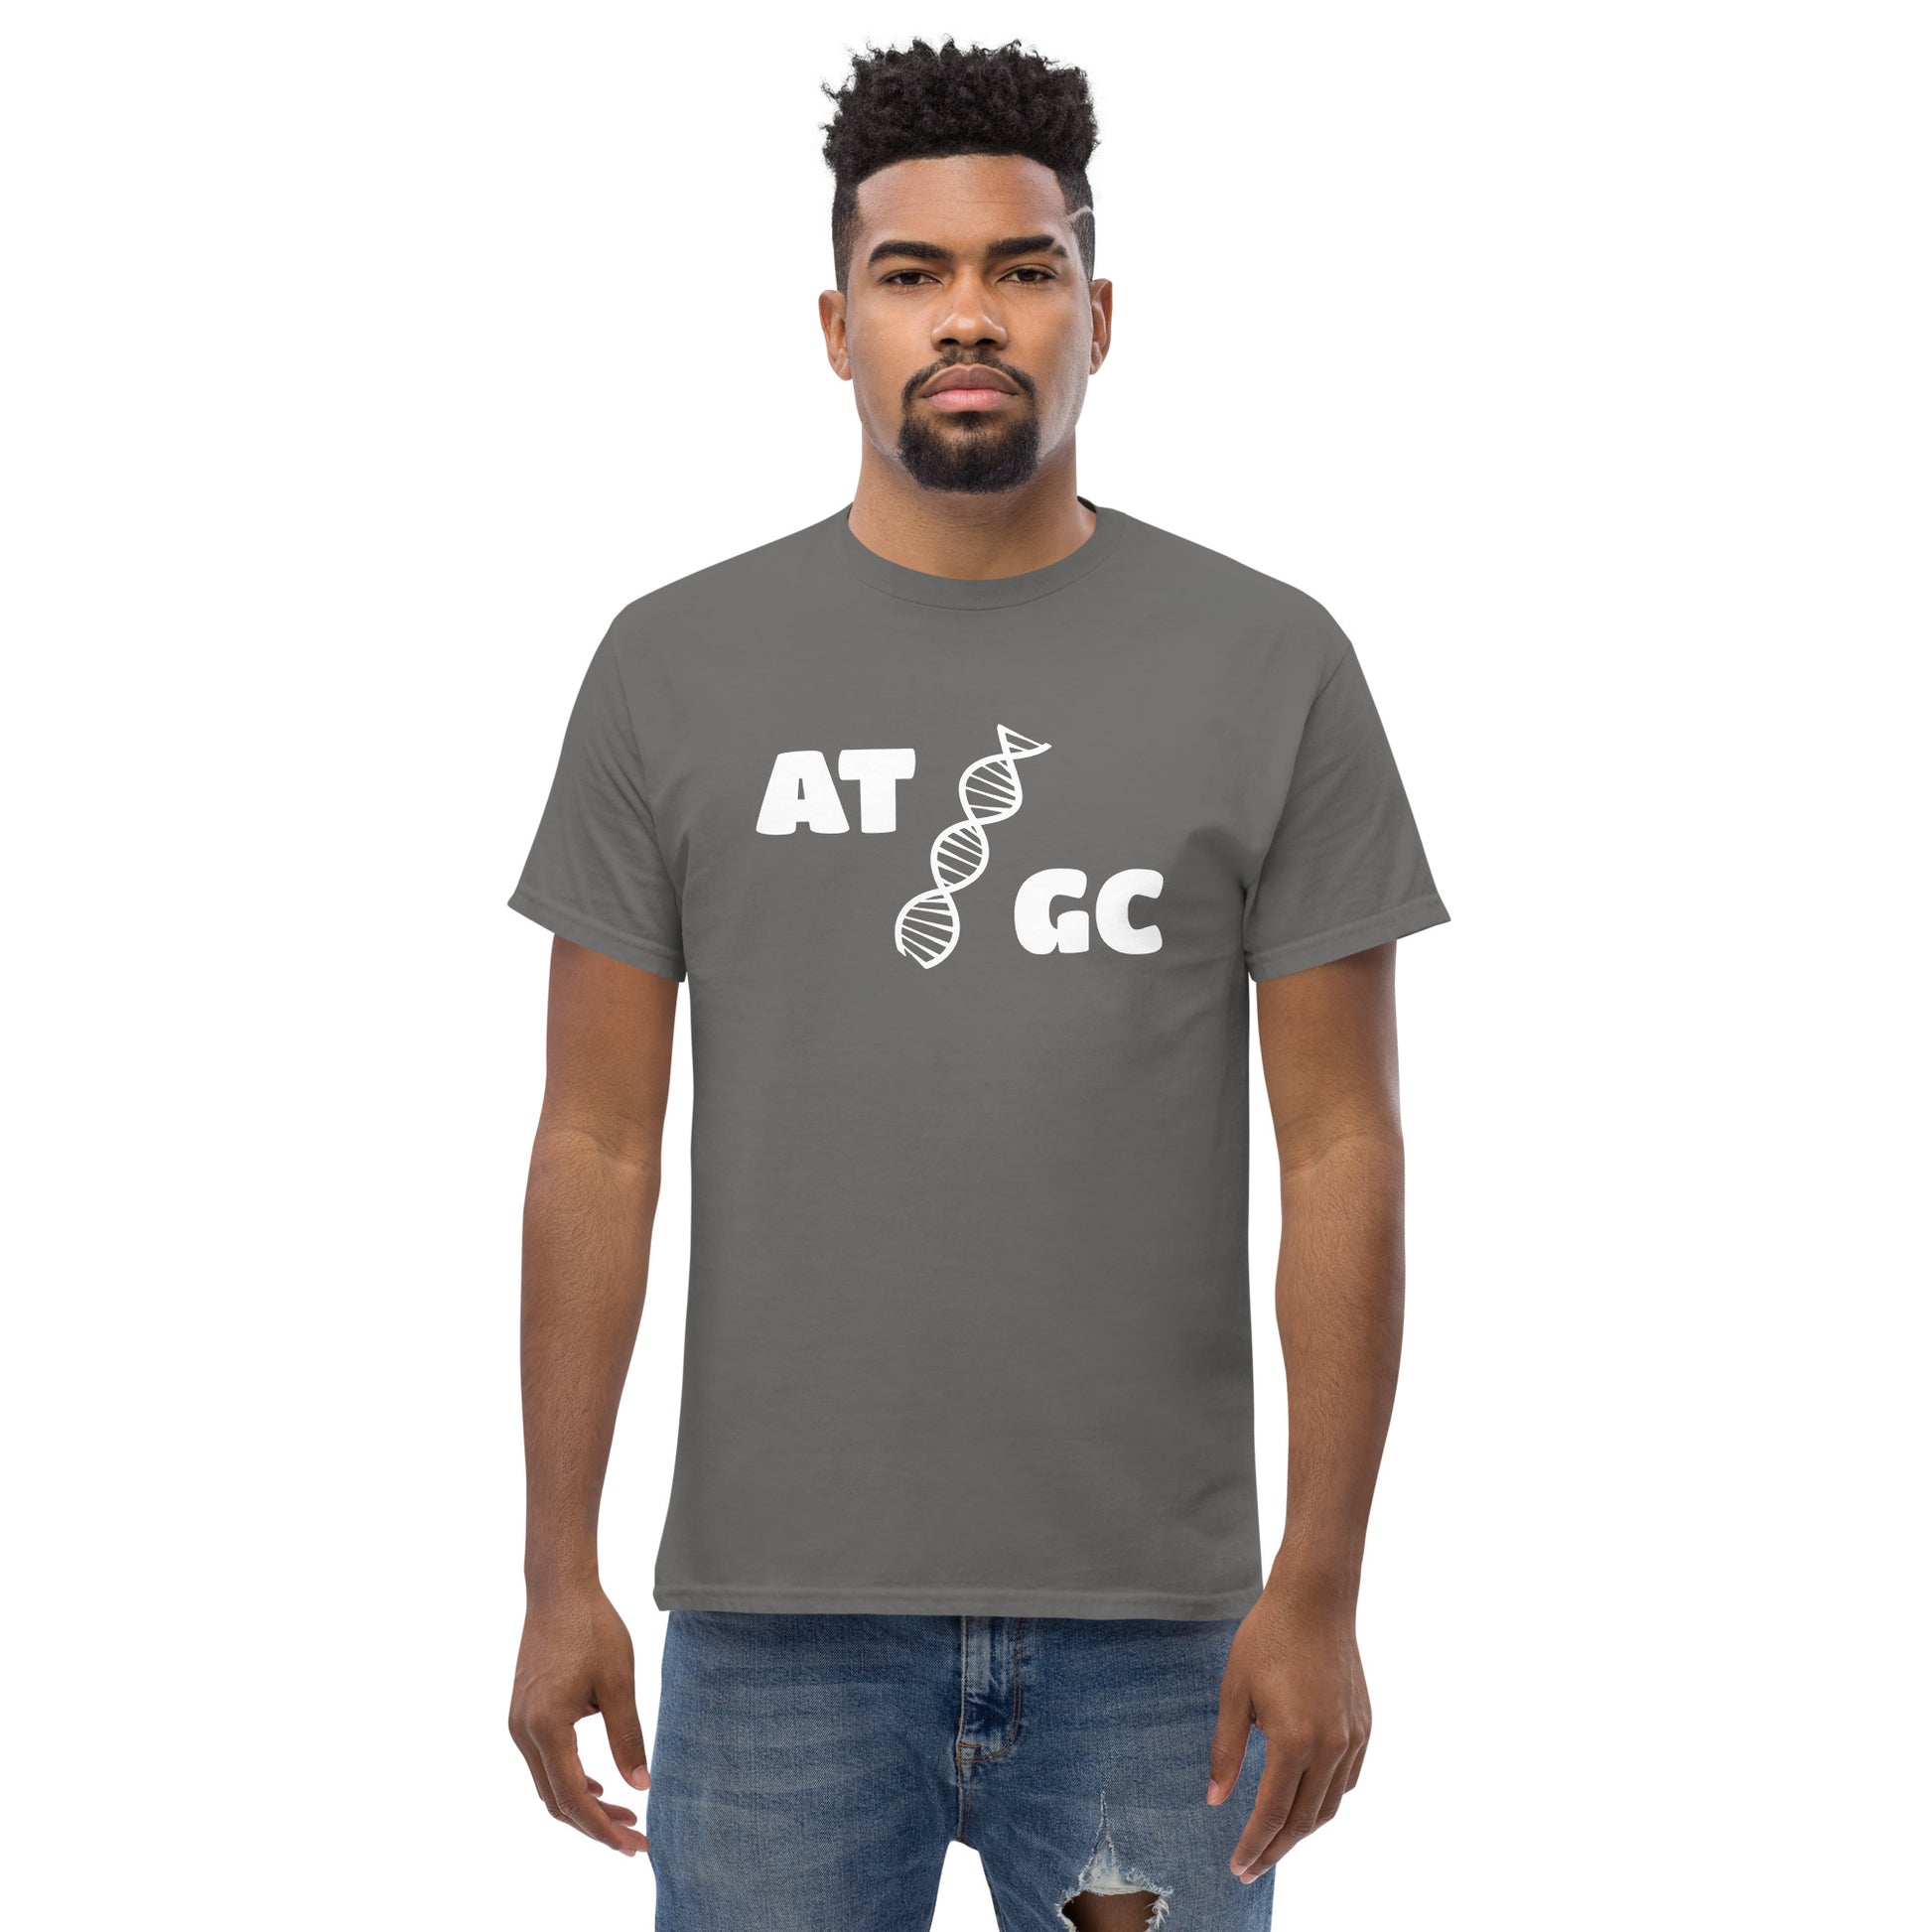 Men with charcoal t-shirt with image of a DNA string and the text "ATGC"